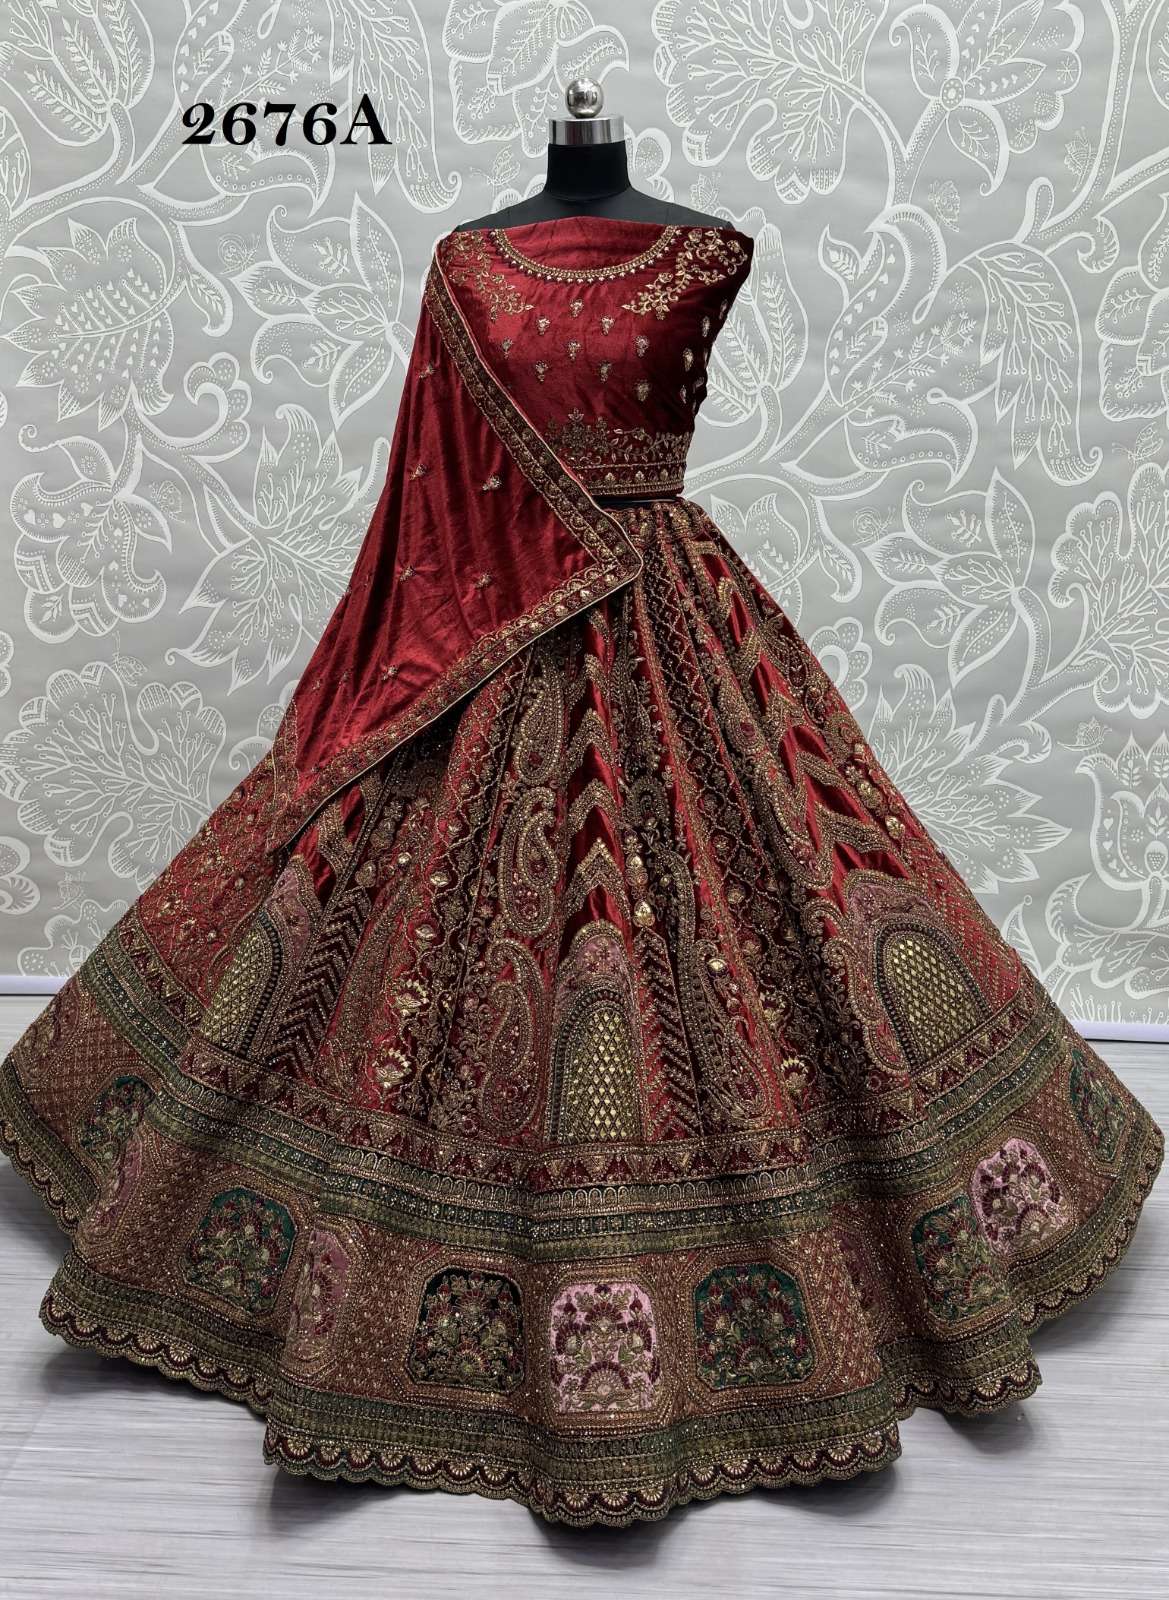 A-2676 COLOURS BY AQSAWHOLESALE VELVET HEAVY EMBROIDERY WORK BRIDAL LEHENGAS